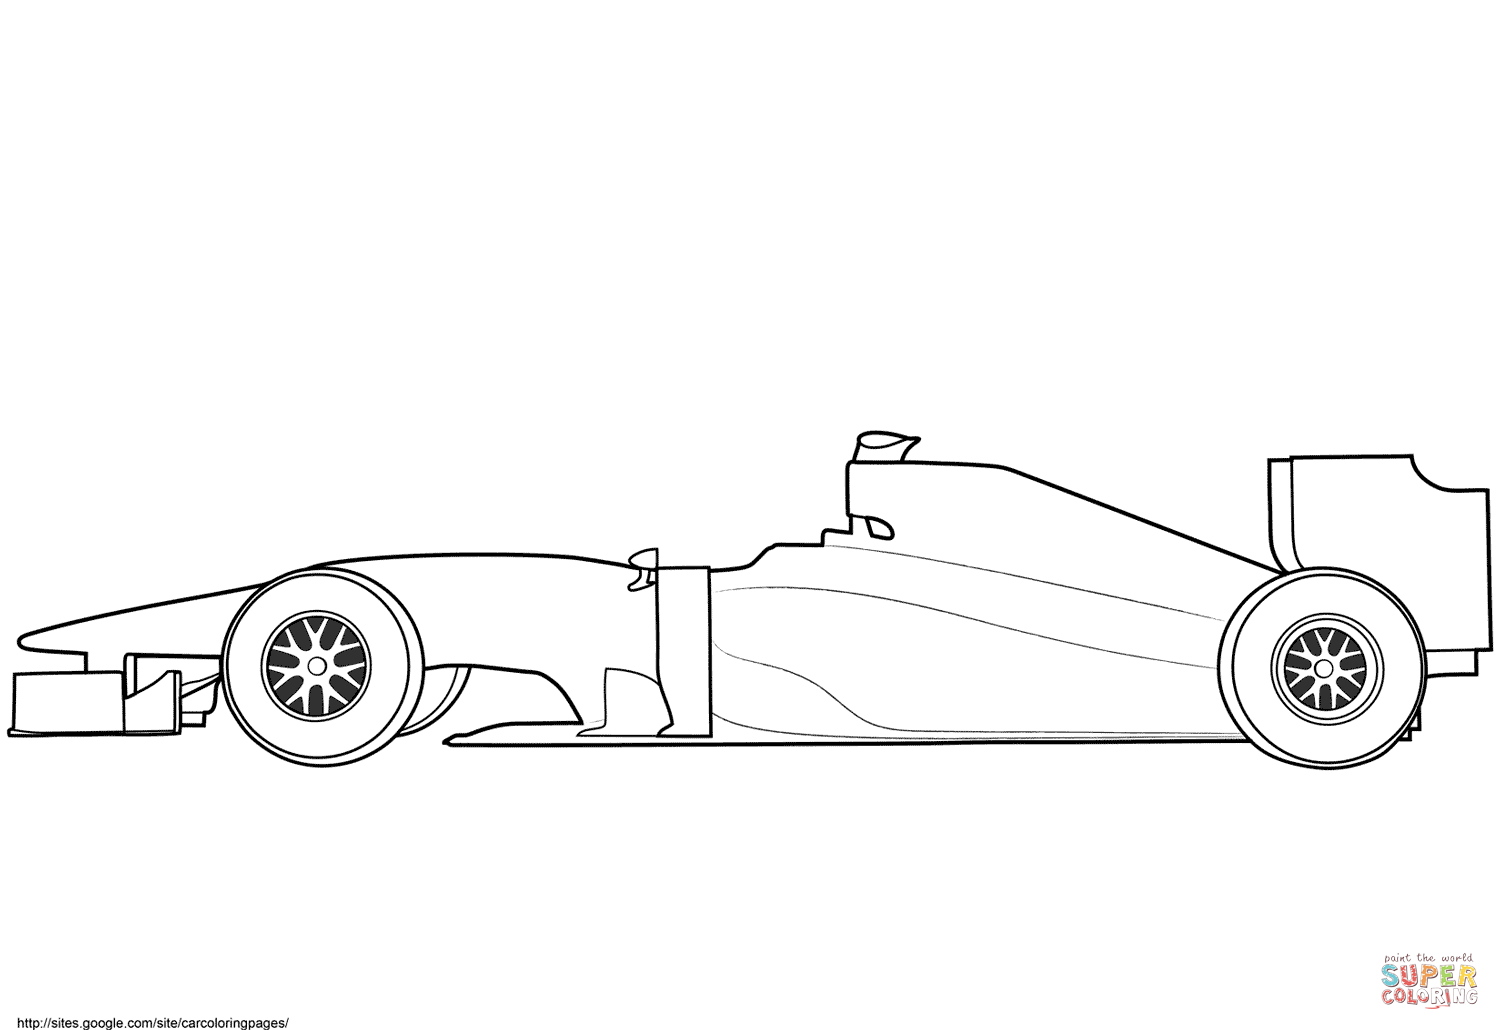 Blank Formula 1 Race Car Coloring Page | Free Printable With Regard To Blank Race Car Templates